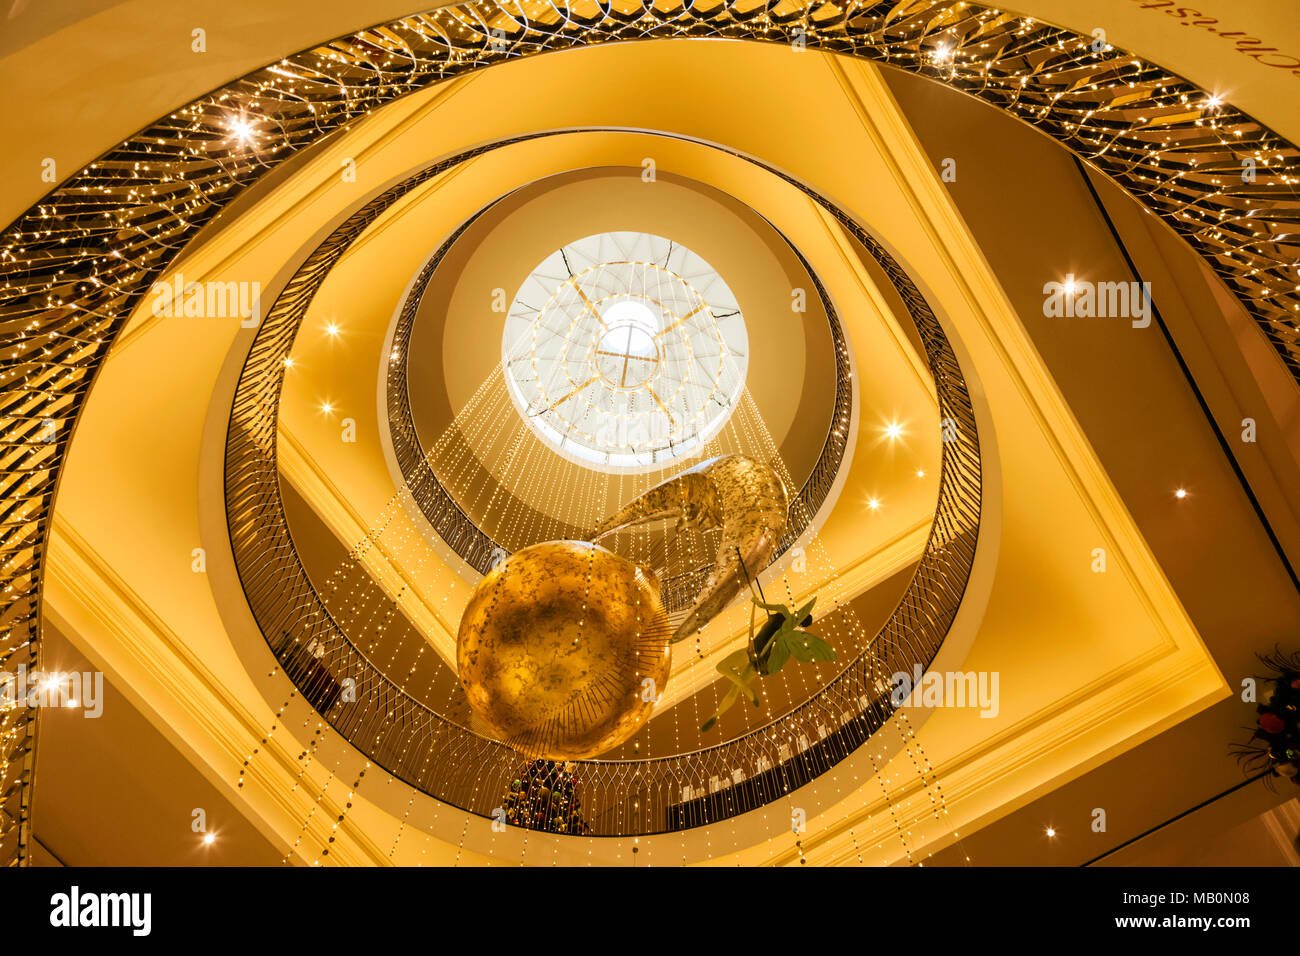 England, London, Piccadilly, Fortnum & Mason Store, Interior Spiral Staircase Stock Photo